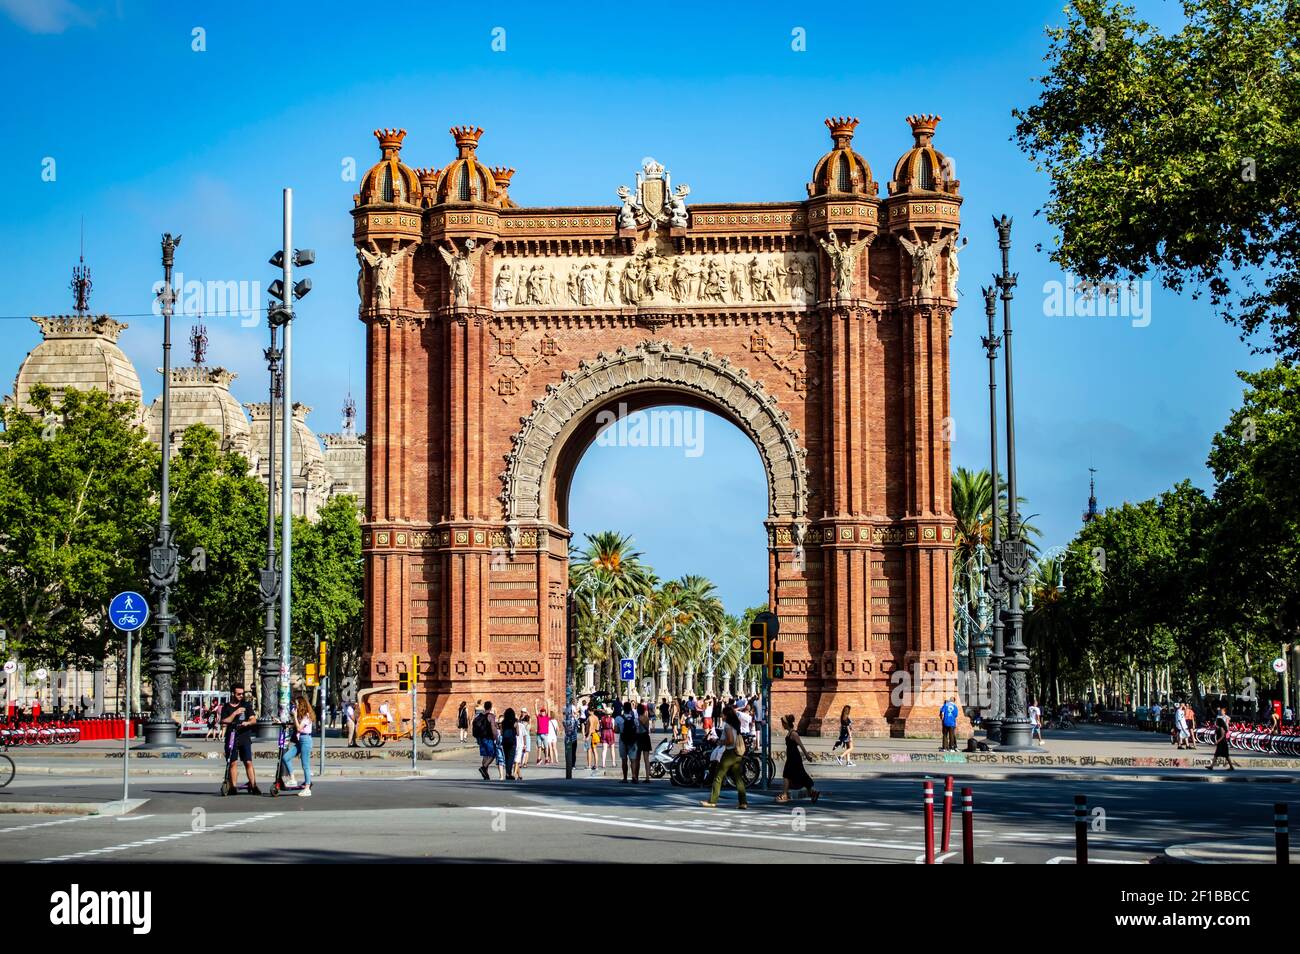 Barcelona, Spain - July 25, 2019: Tourists and locals walking through the Triumphal Arch of Barcelona in Spain Stock Photo